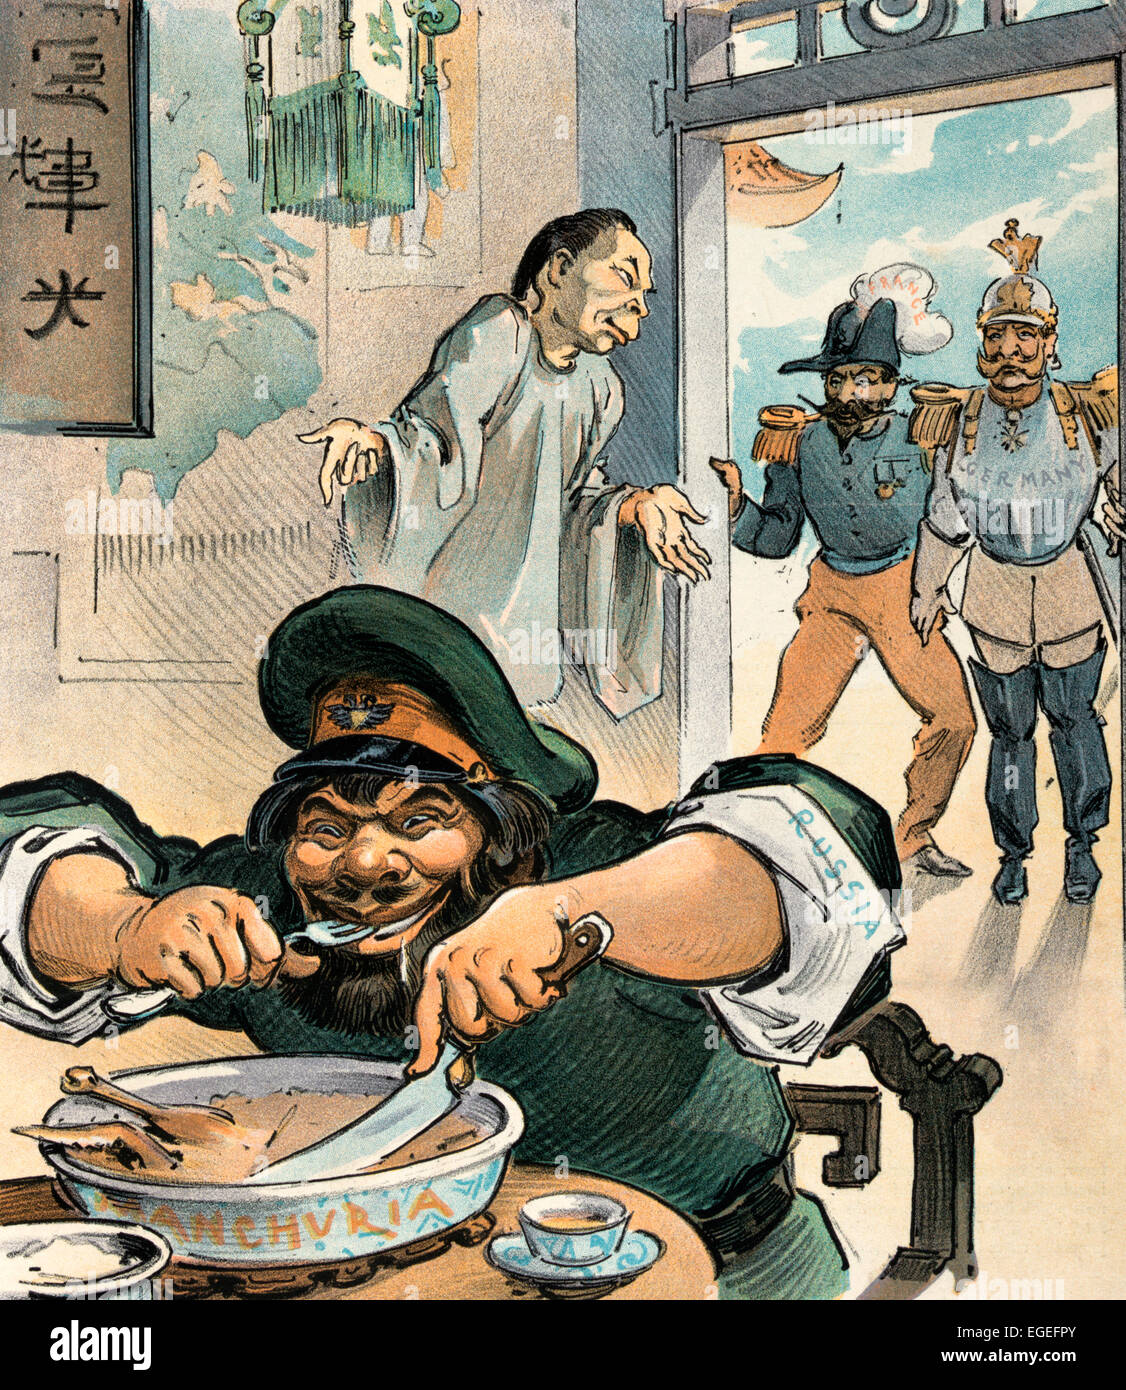 First come, first served - Illustration shows a scene in a Chinese restaurant where a man labeled 'Russia' is eating from a bowl of food labeled 'Manchuria'; in the background, a Chinese man tells Emile Loubet labeled 'France' and William II labeled 'Germany', who are standing outside the door, that whoever comes first, gets served first. Political cartoon, 1903 Stock Photo